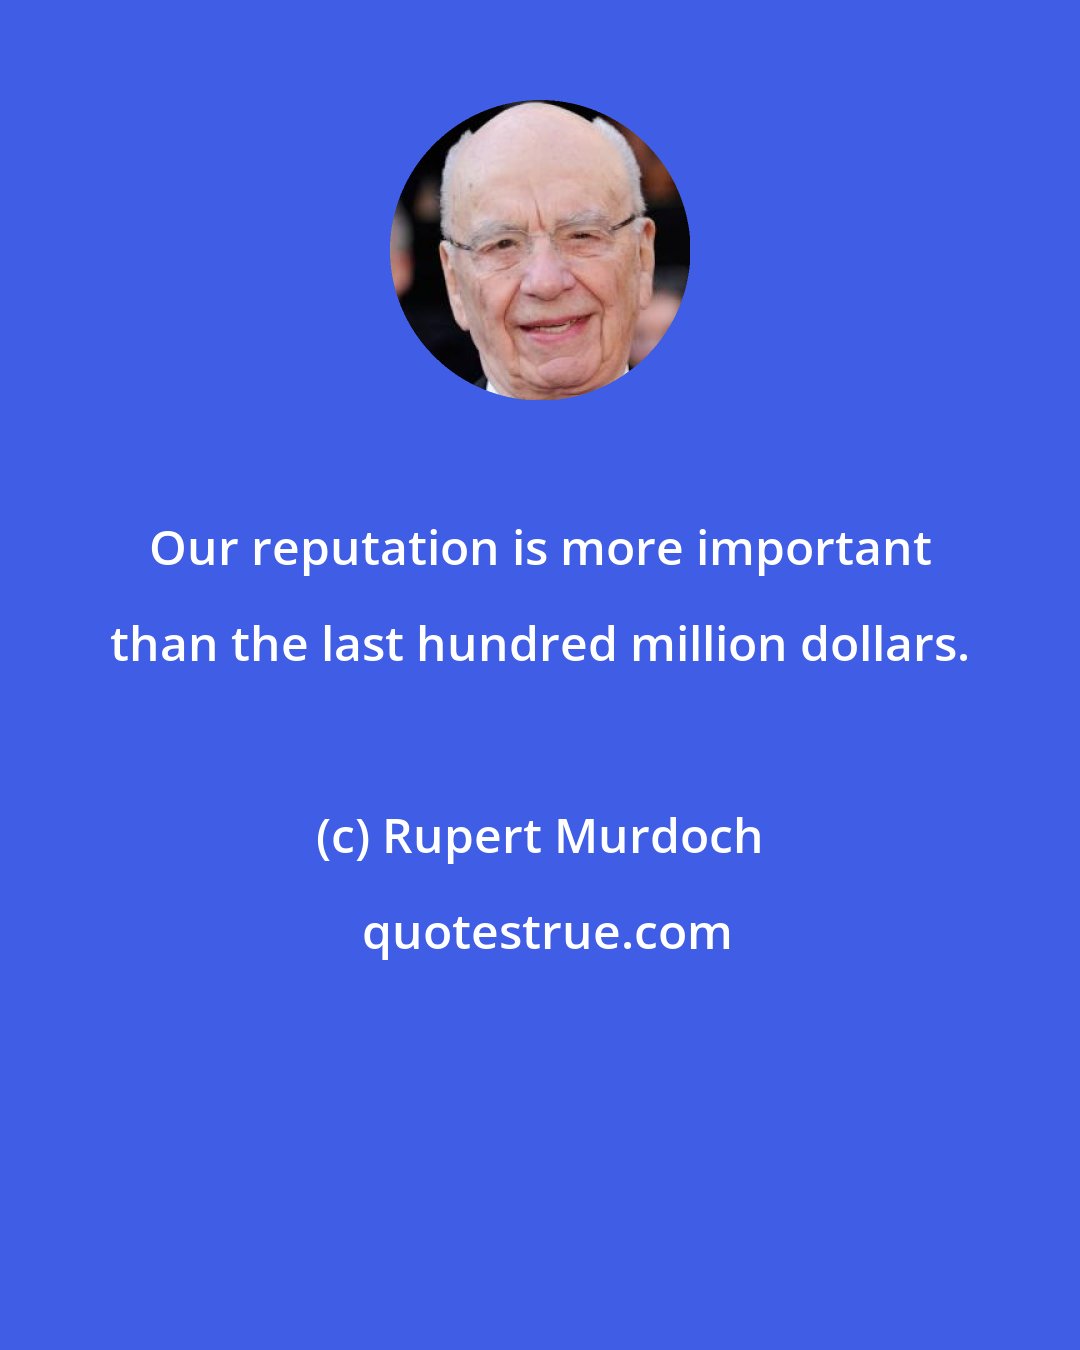 Rupert Murdoch: Our reputation is more important than the last hundred million dollars.